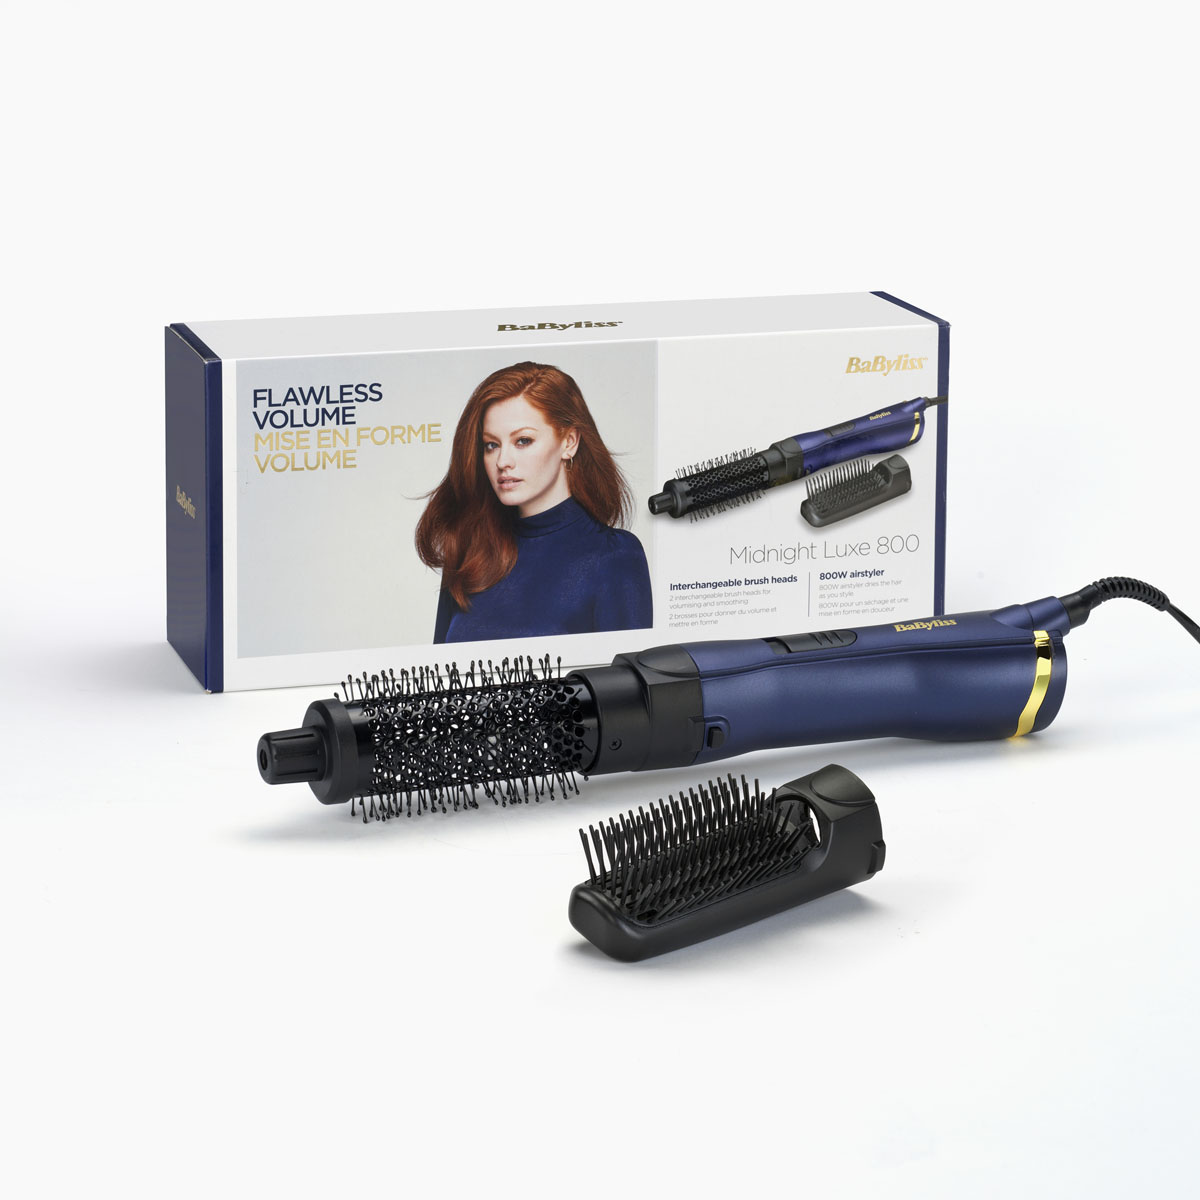 800 Luxe Midnight Finland | BaByliss